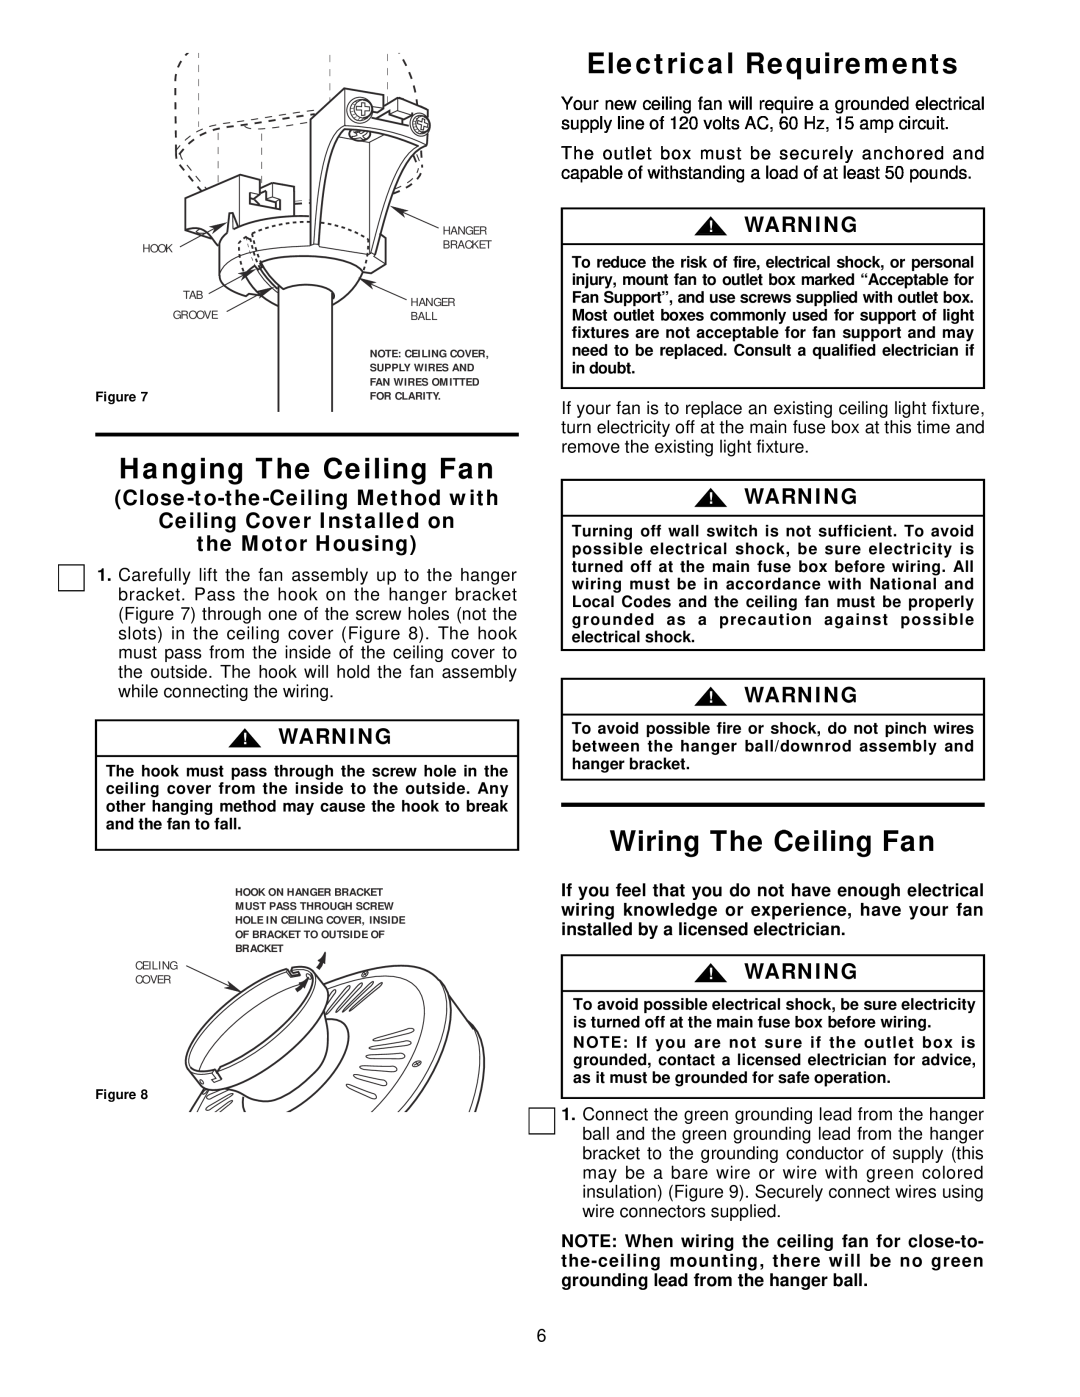 Emerson CF710AB00, CF711PBOO owner manual Hanging The Ceiling Fan, Electrical Requirements, Wiring The Ceiling Fan 